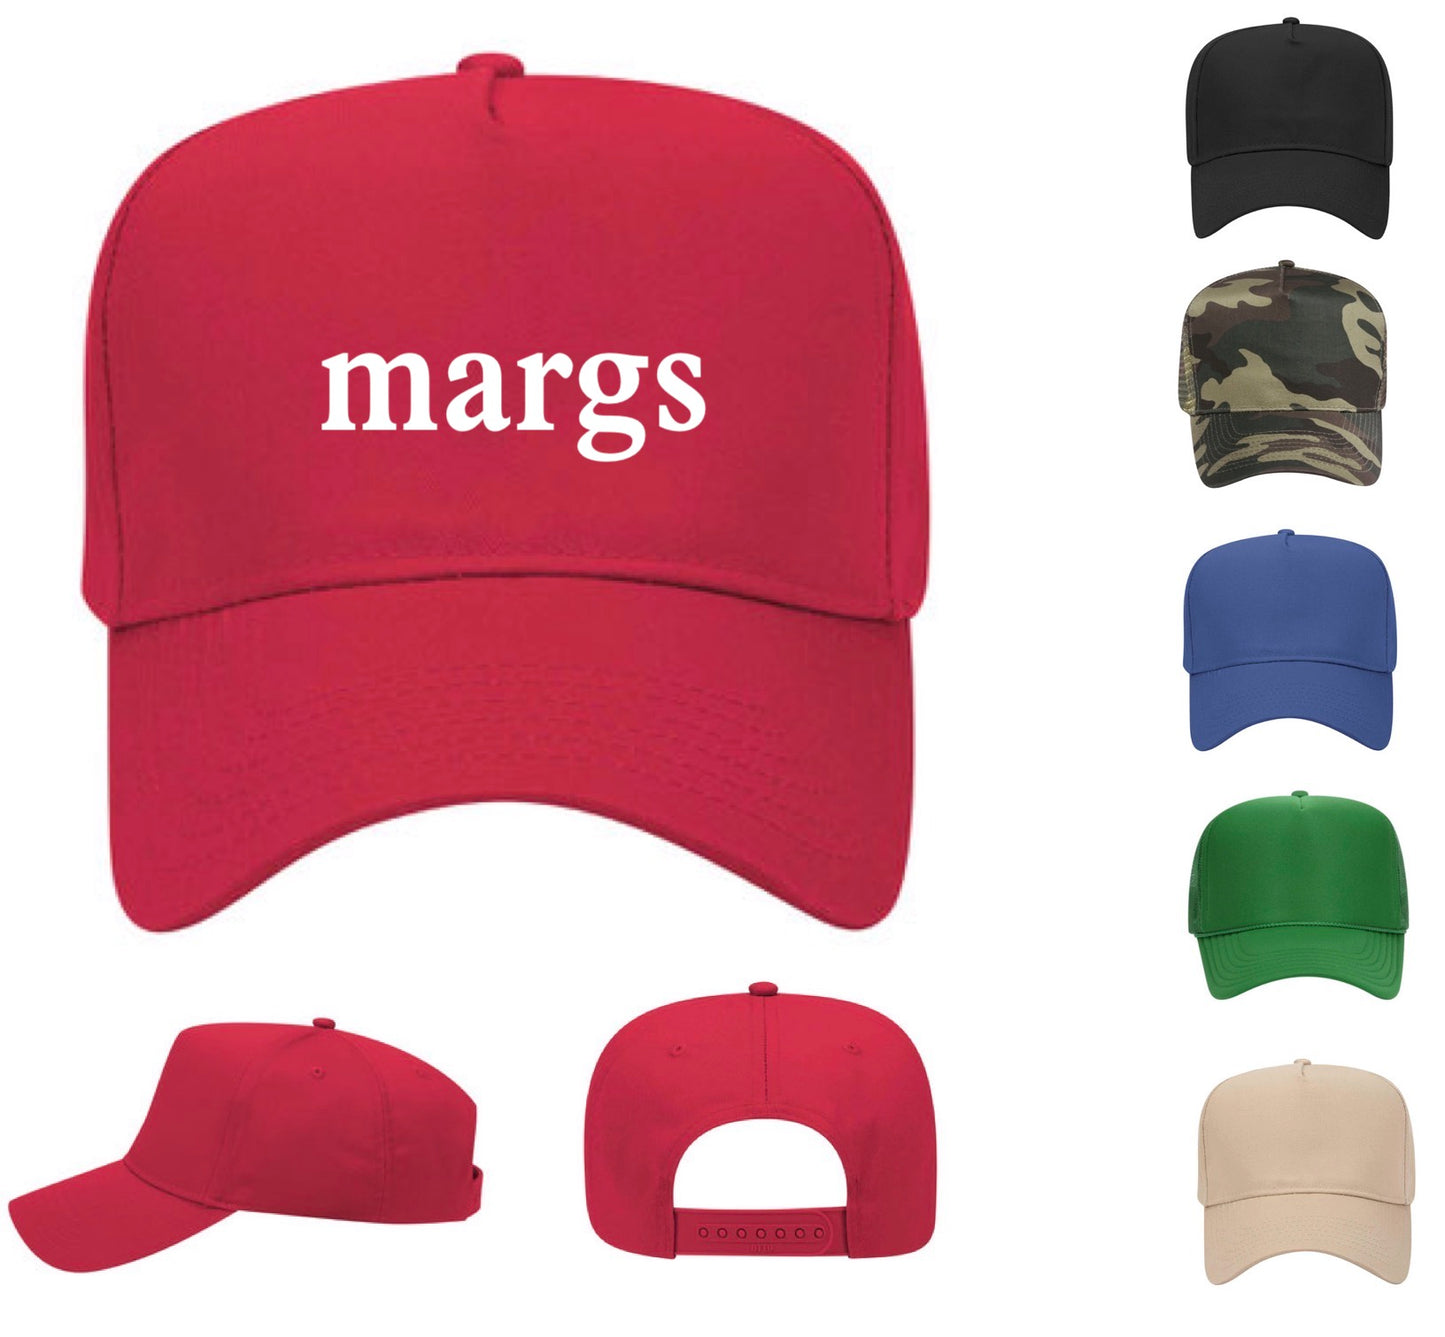 Margs Hat (FREE Shipping)